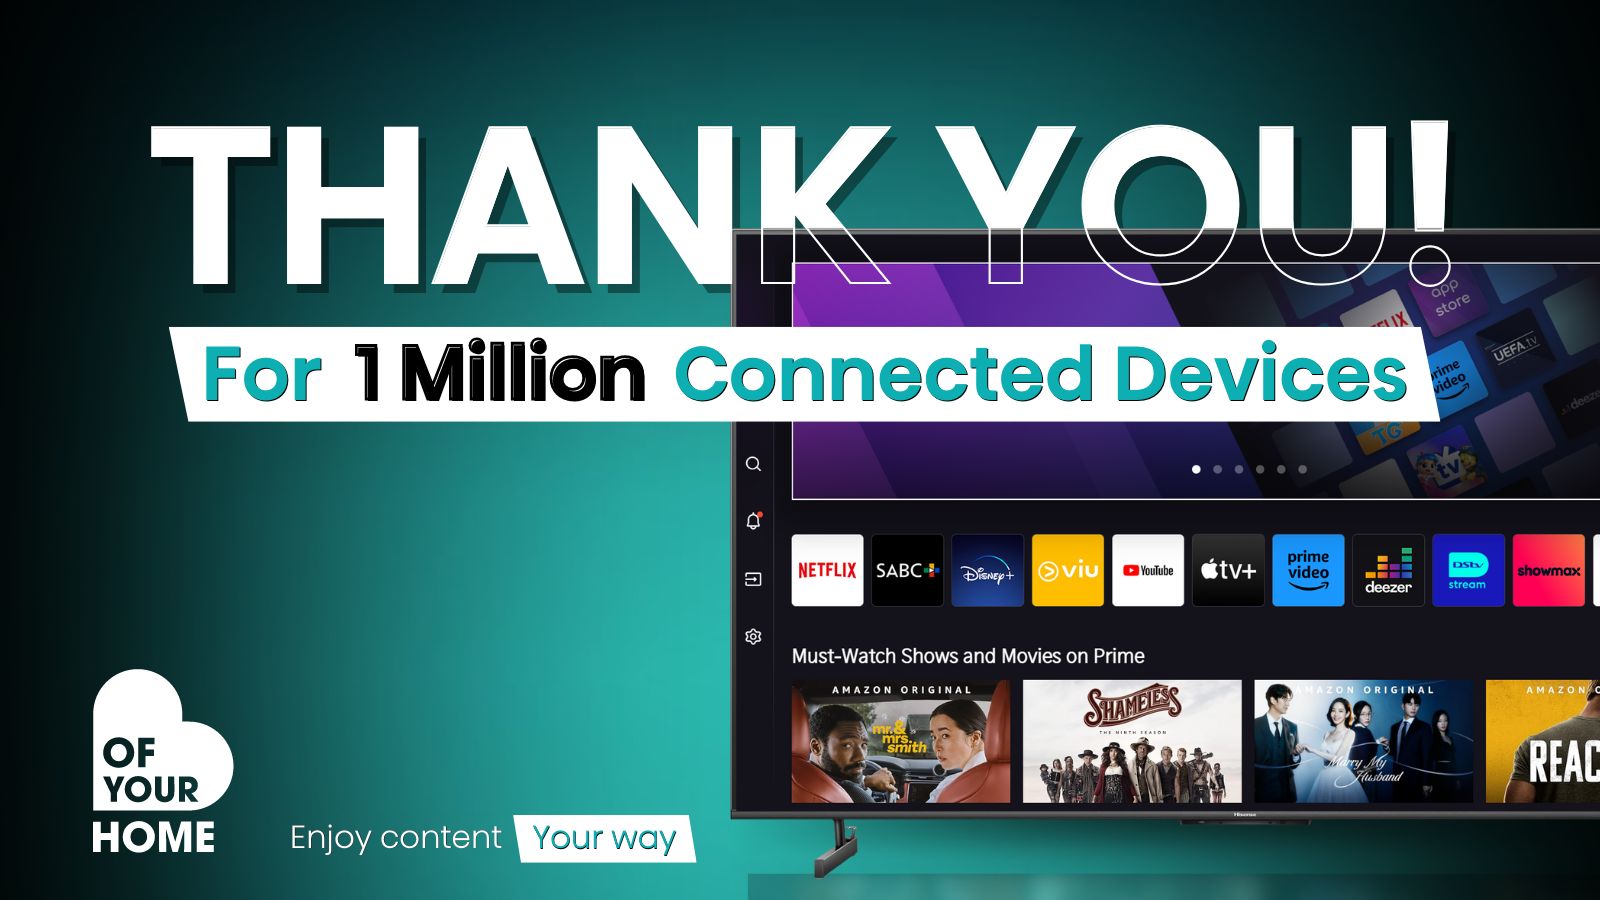 The power of streaming! VIDAA has surpassed 1 million streaming devices on Hisense VIDAA smart TVs, a testament to its growing popularity and user engagement